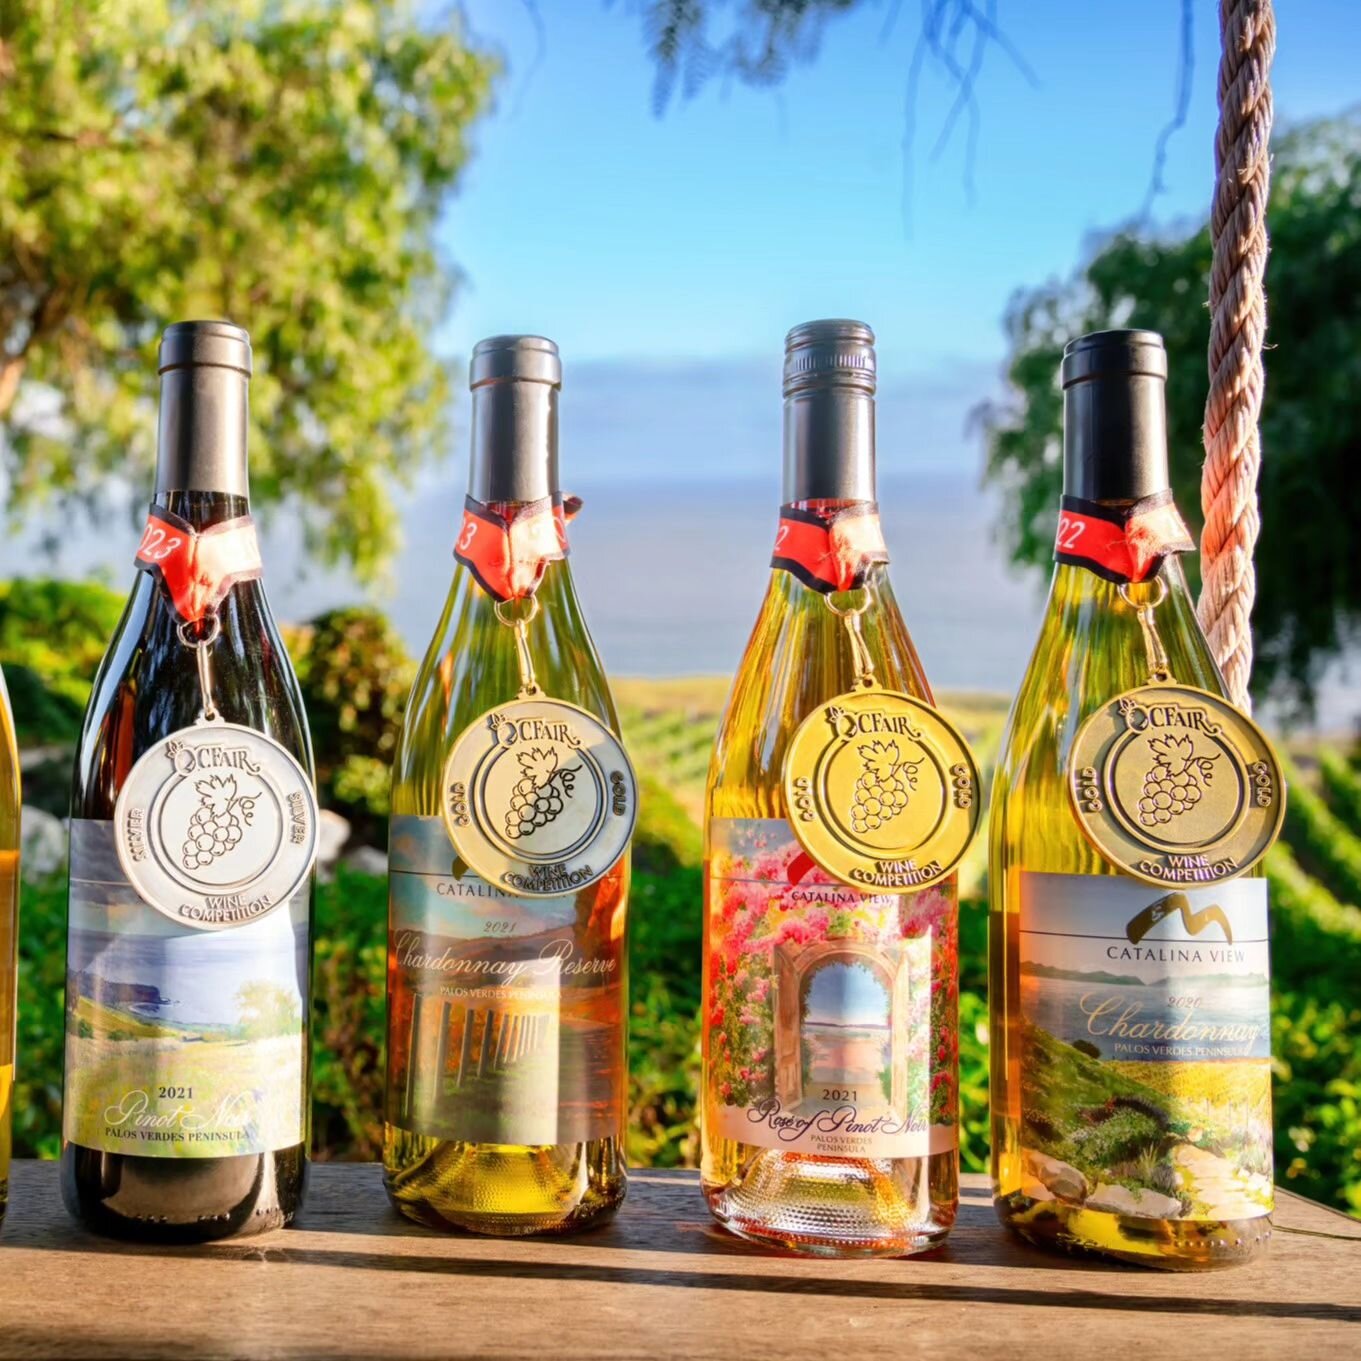 Have you tried our award-winning wines yet? 🏅Our Pinot Noir, Chardonnay, Chardonnay Reserve, and Ros&eacute; of Pinot Noir have each been awarded medals from the OC Fair Commercial Wine Competition🥂 Visit our website for a list of local restaurants